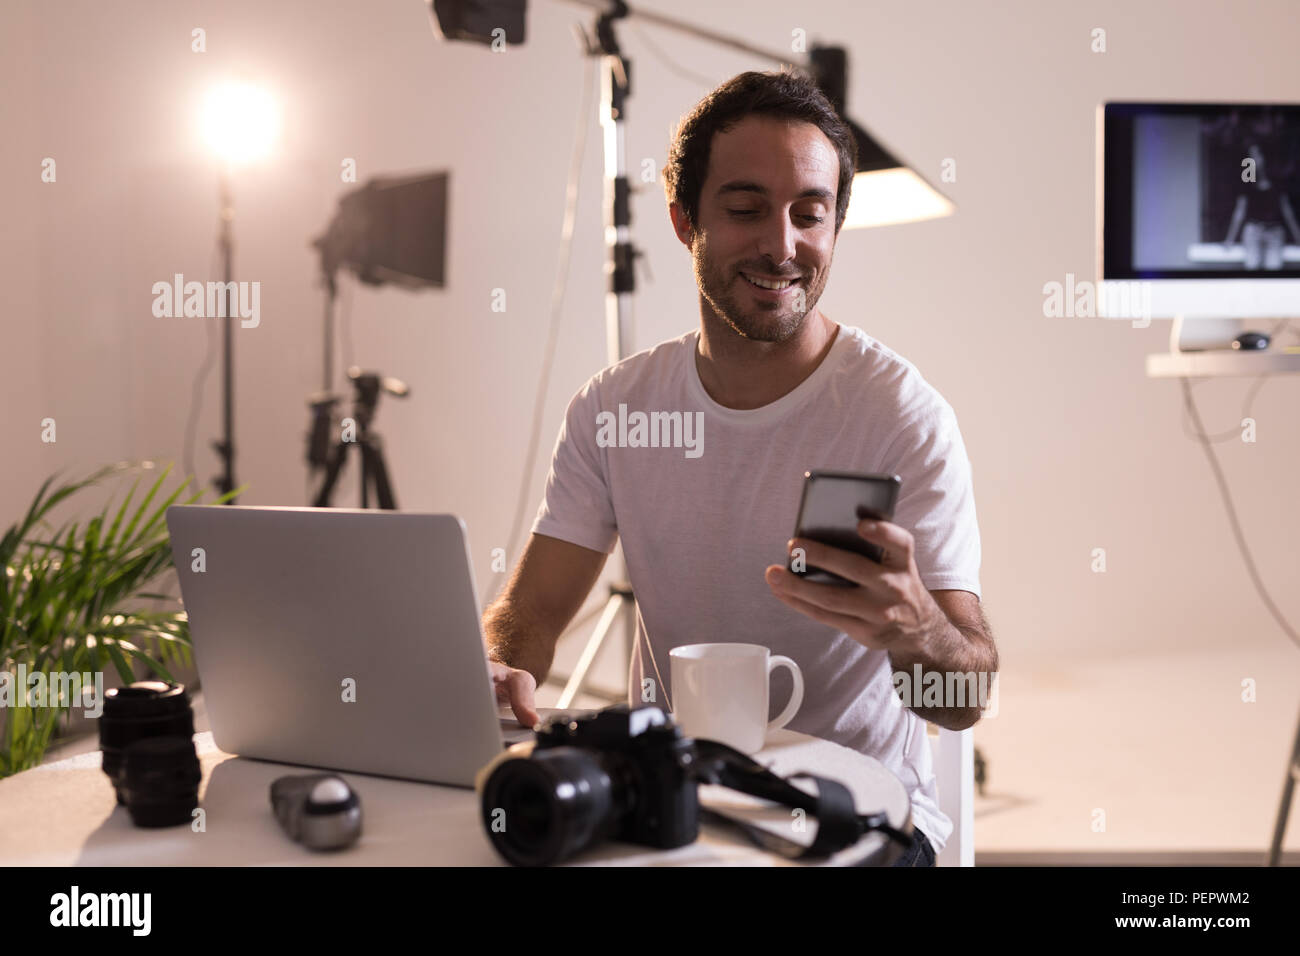 Male photographer using mobile phone while working on laptop Stock Photo